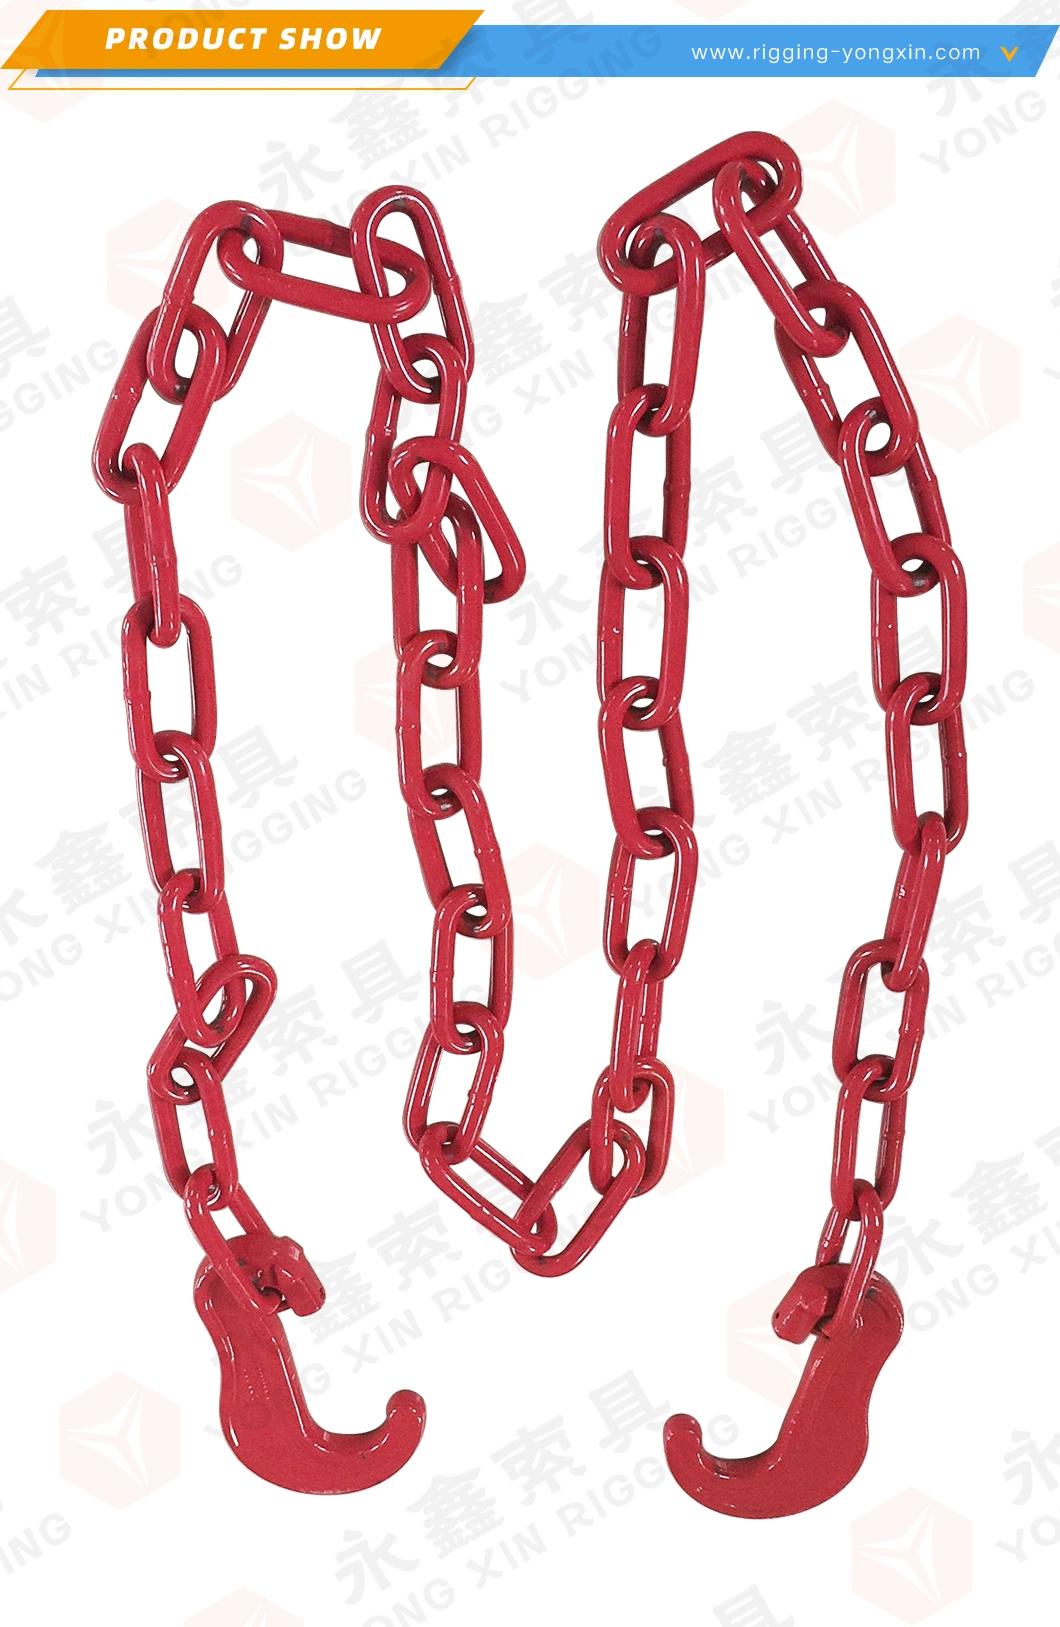 G80 Load Lashing Chain with One Flat Hook at Both End in Rigging Hardware Painted with Hook